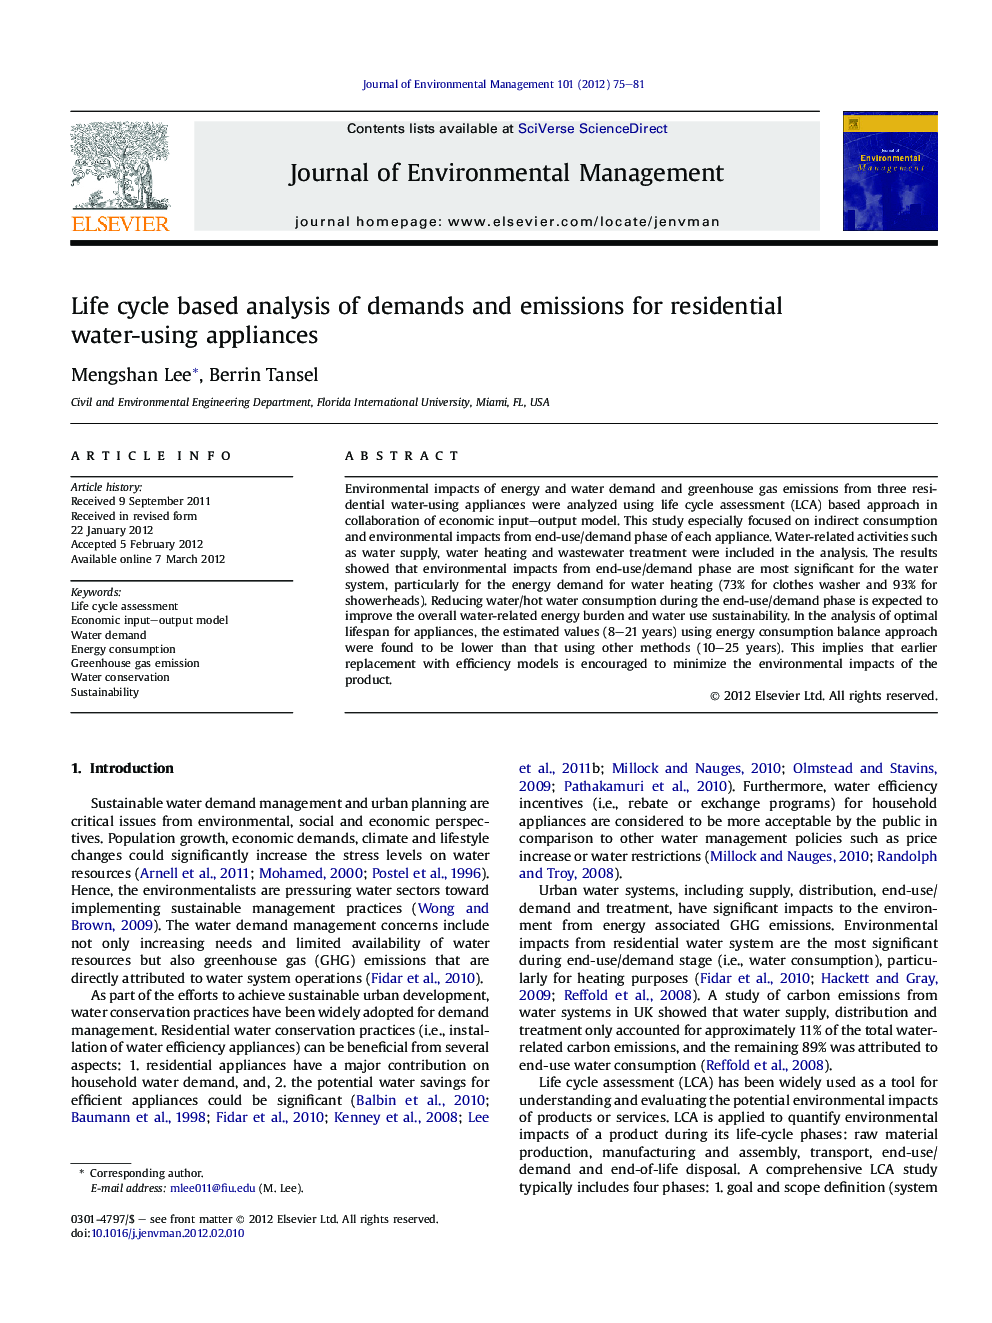 Life cycle based analysis of demands and emissions for residential water-using appliances